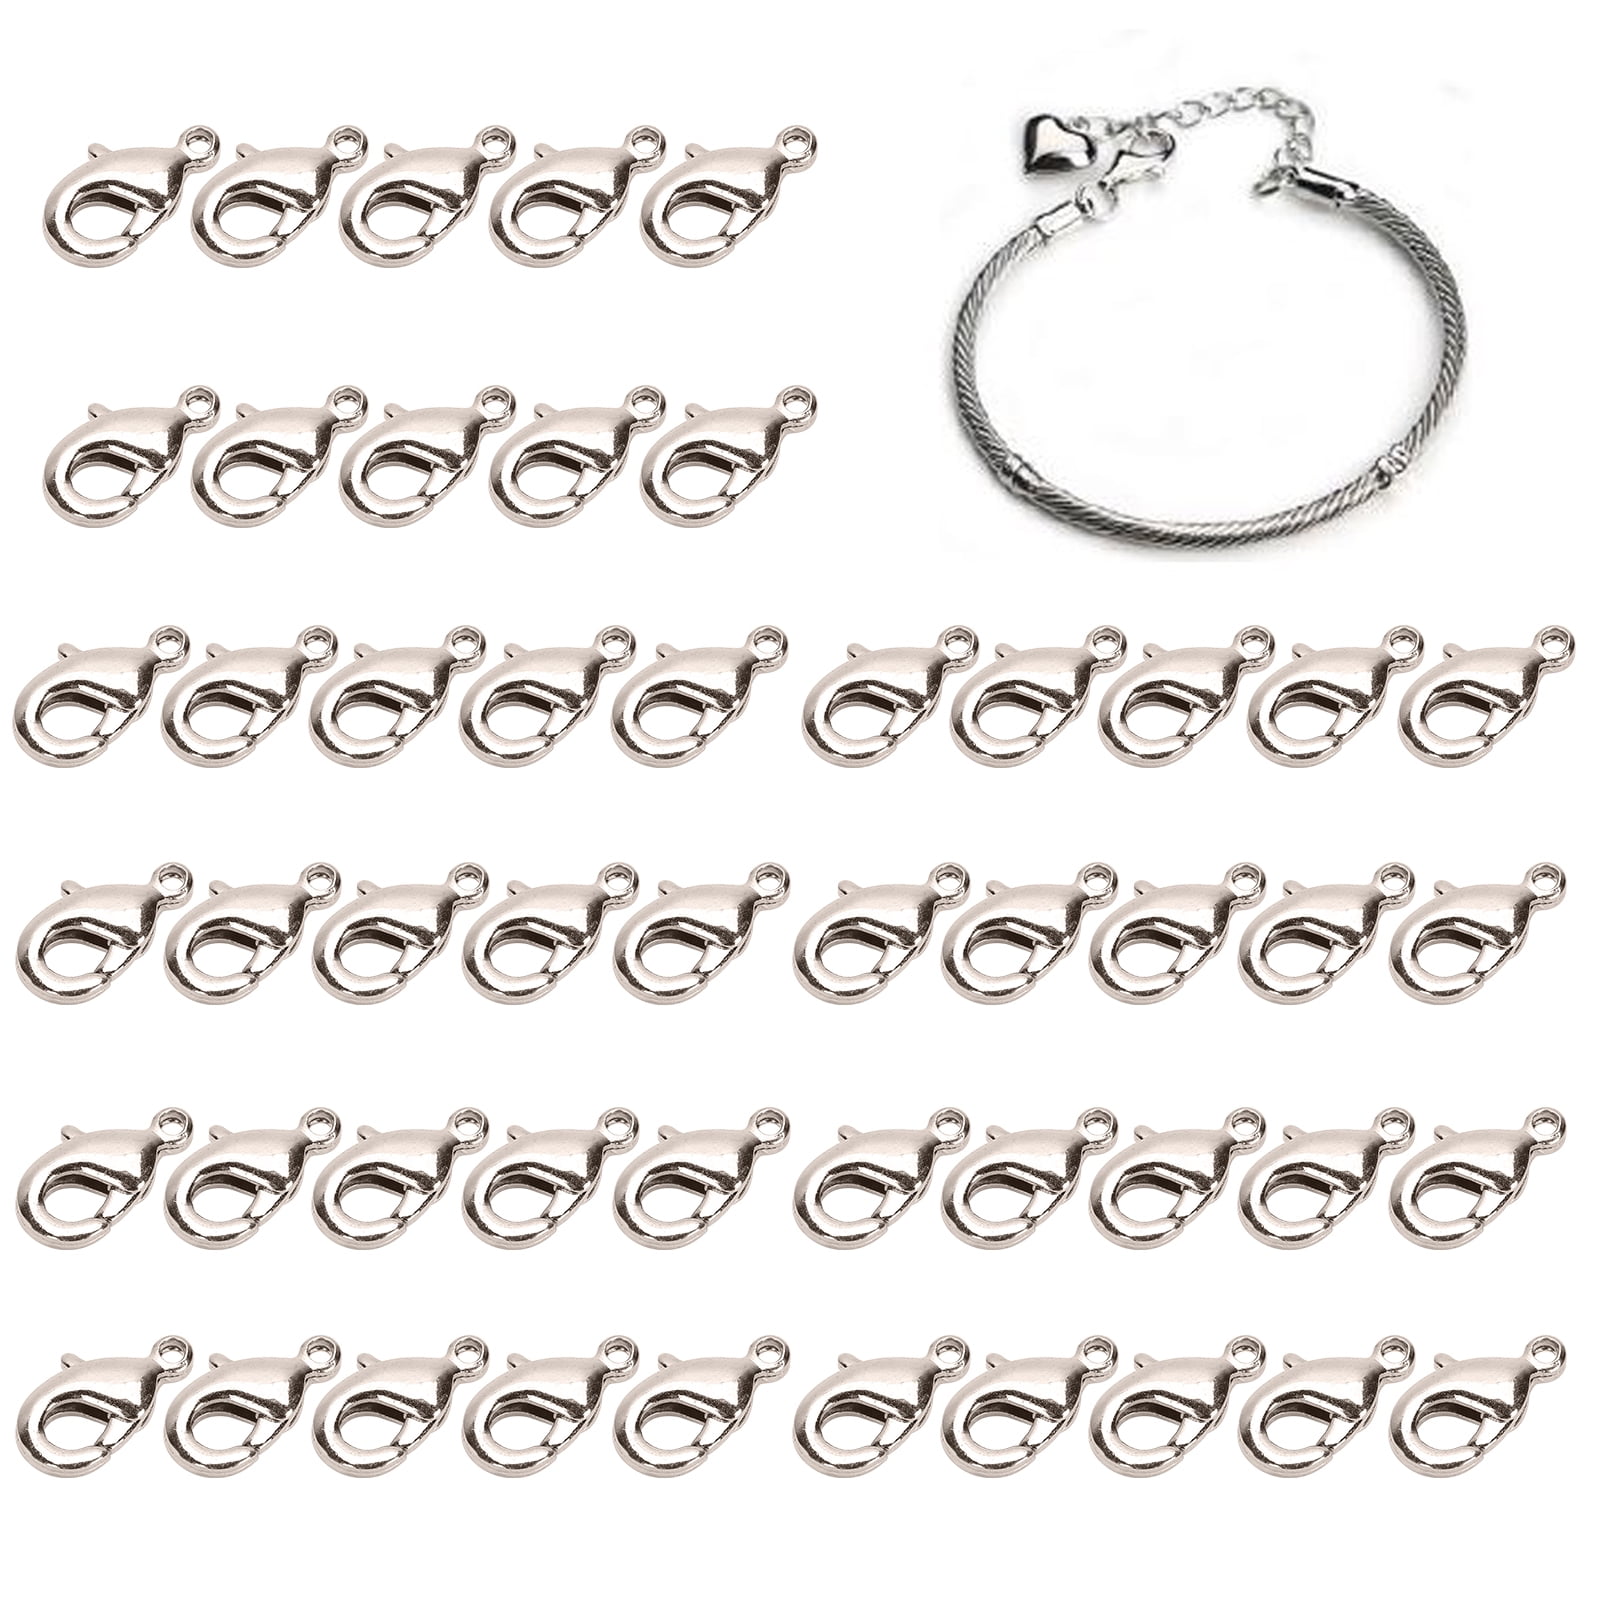 50pcs Kit lobster Clasp Hooks For Necklace Bracelet Chain DIY Jewelry Findings 